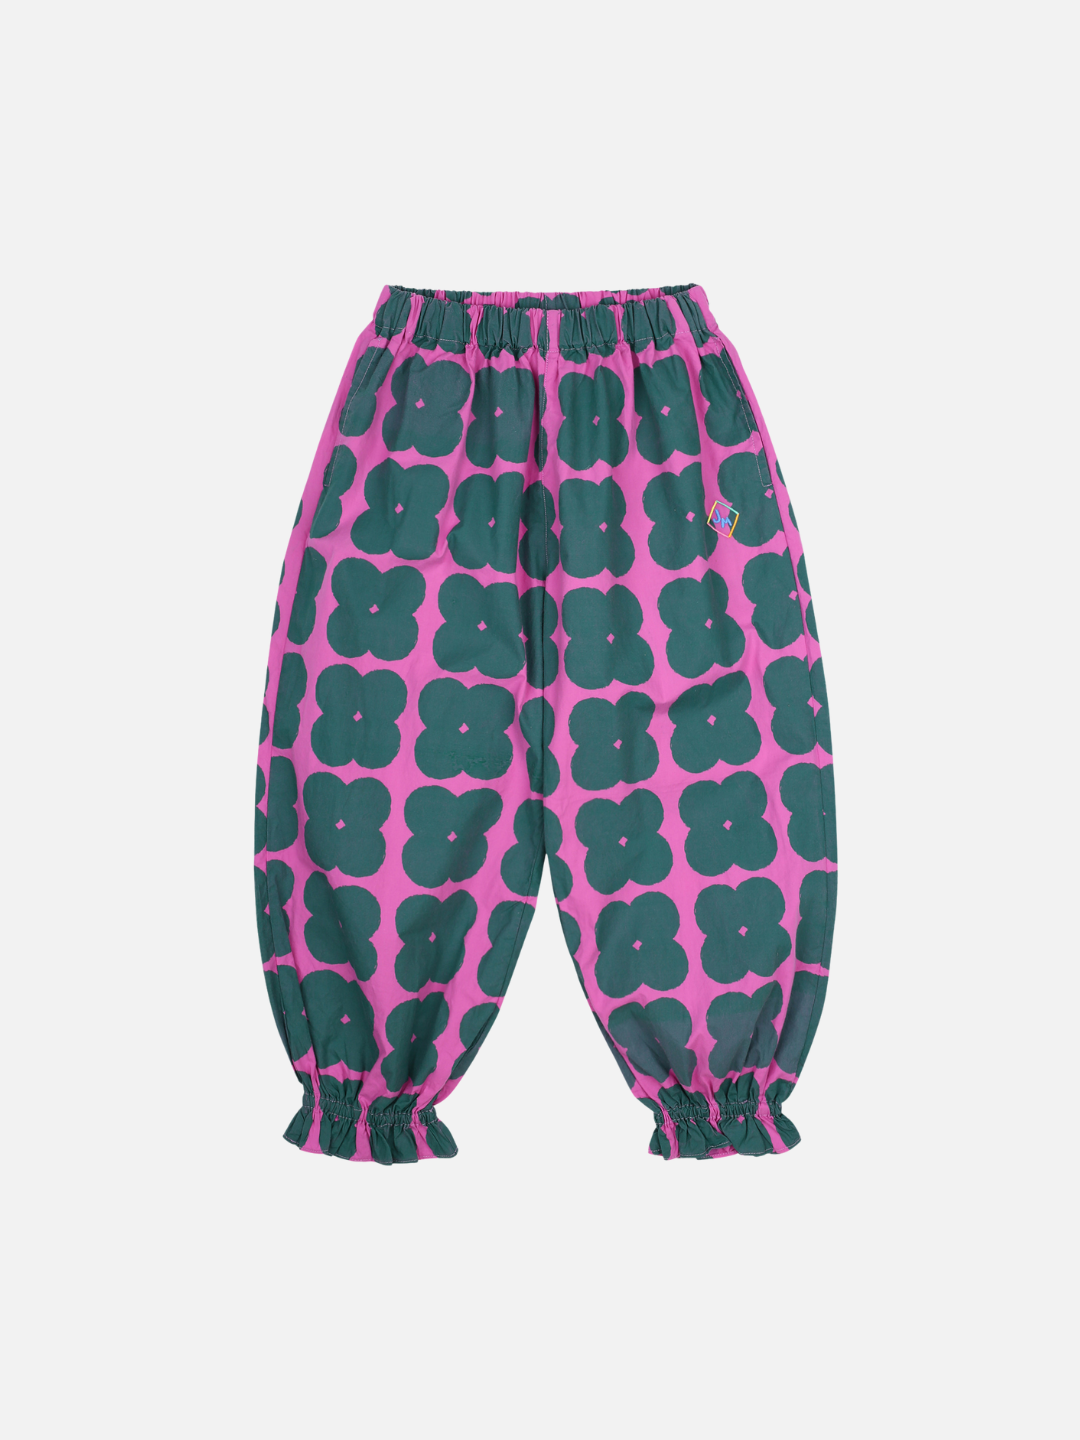 Front of Clover Pull-on Pants. Dark green clover shapes on a solid pink background. Cinched around the ankle and has an elastic waist.